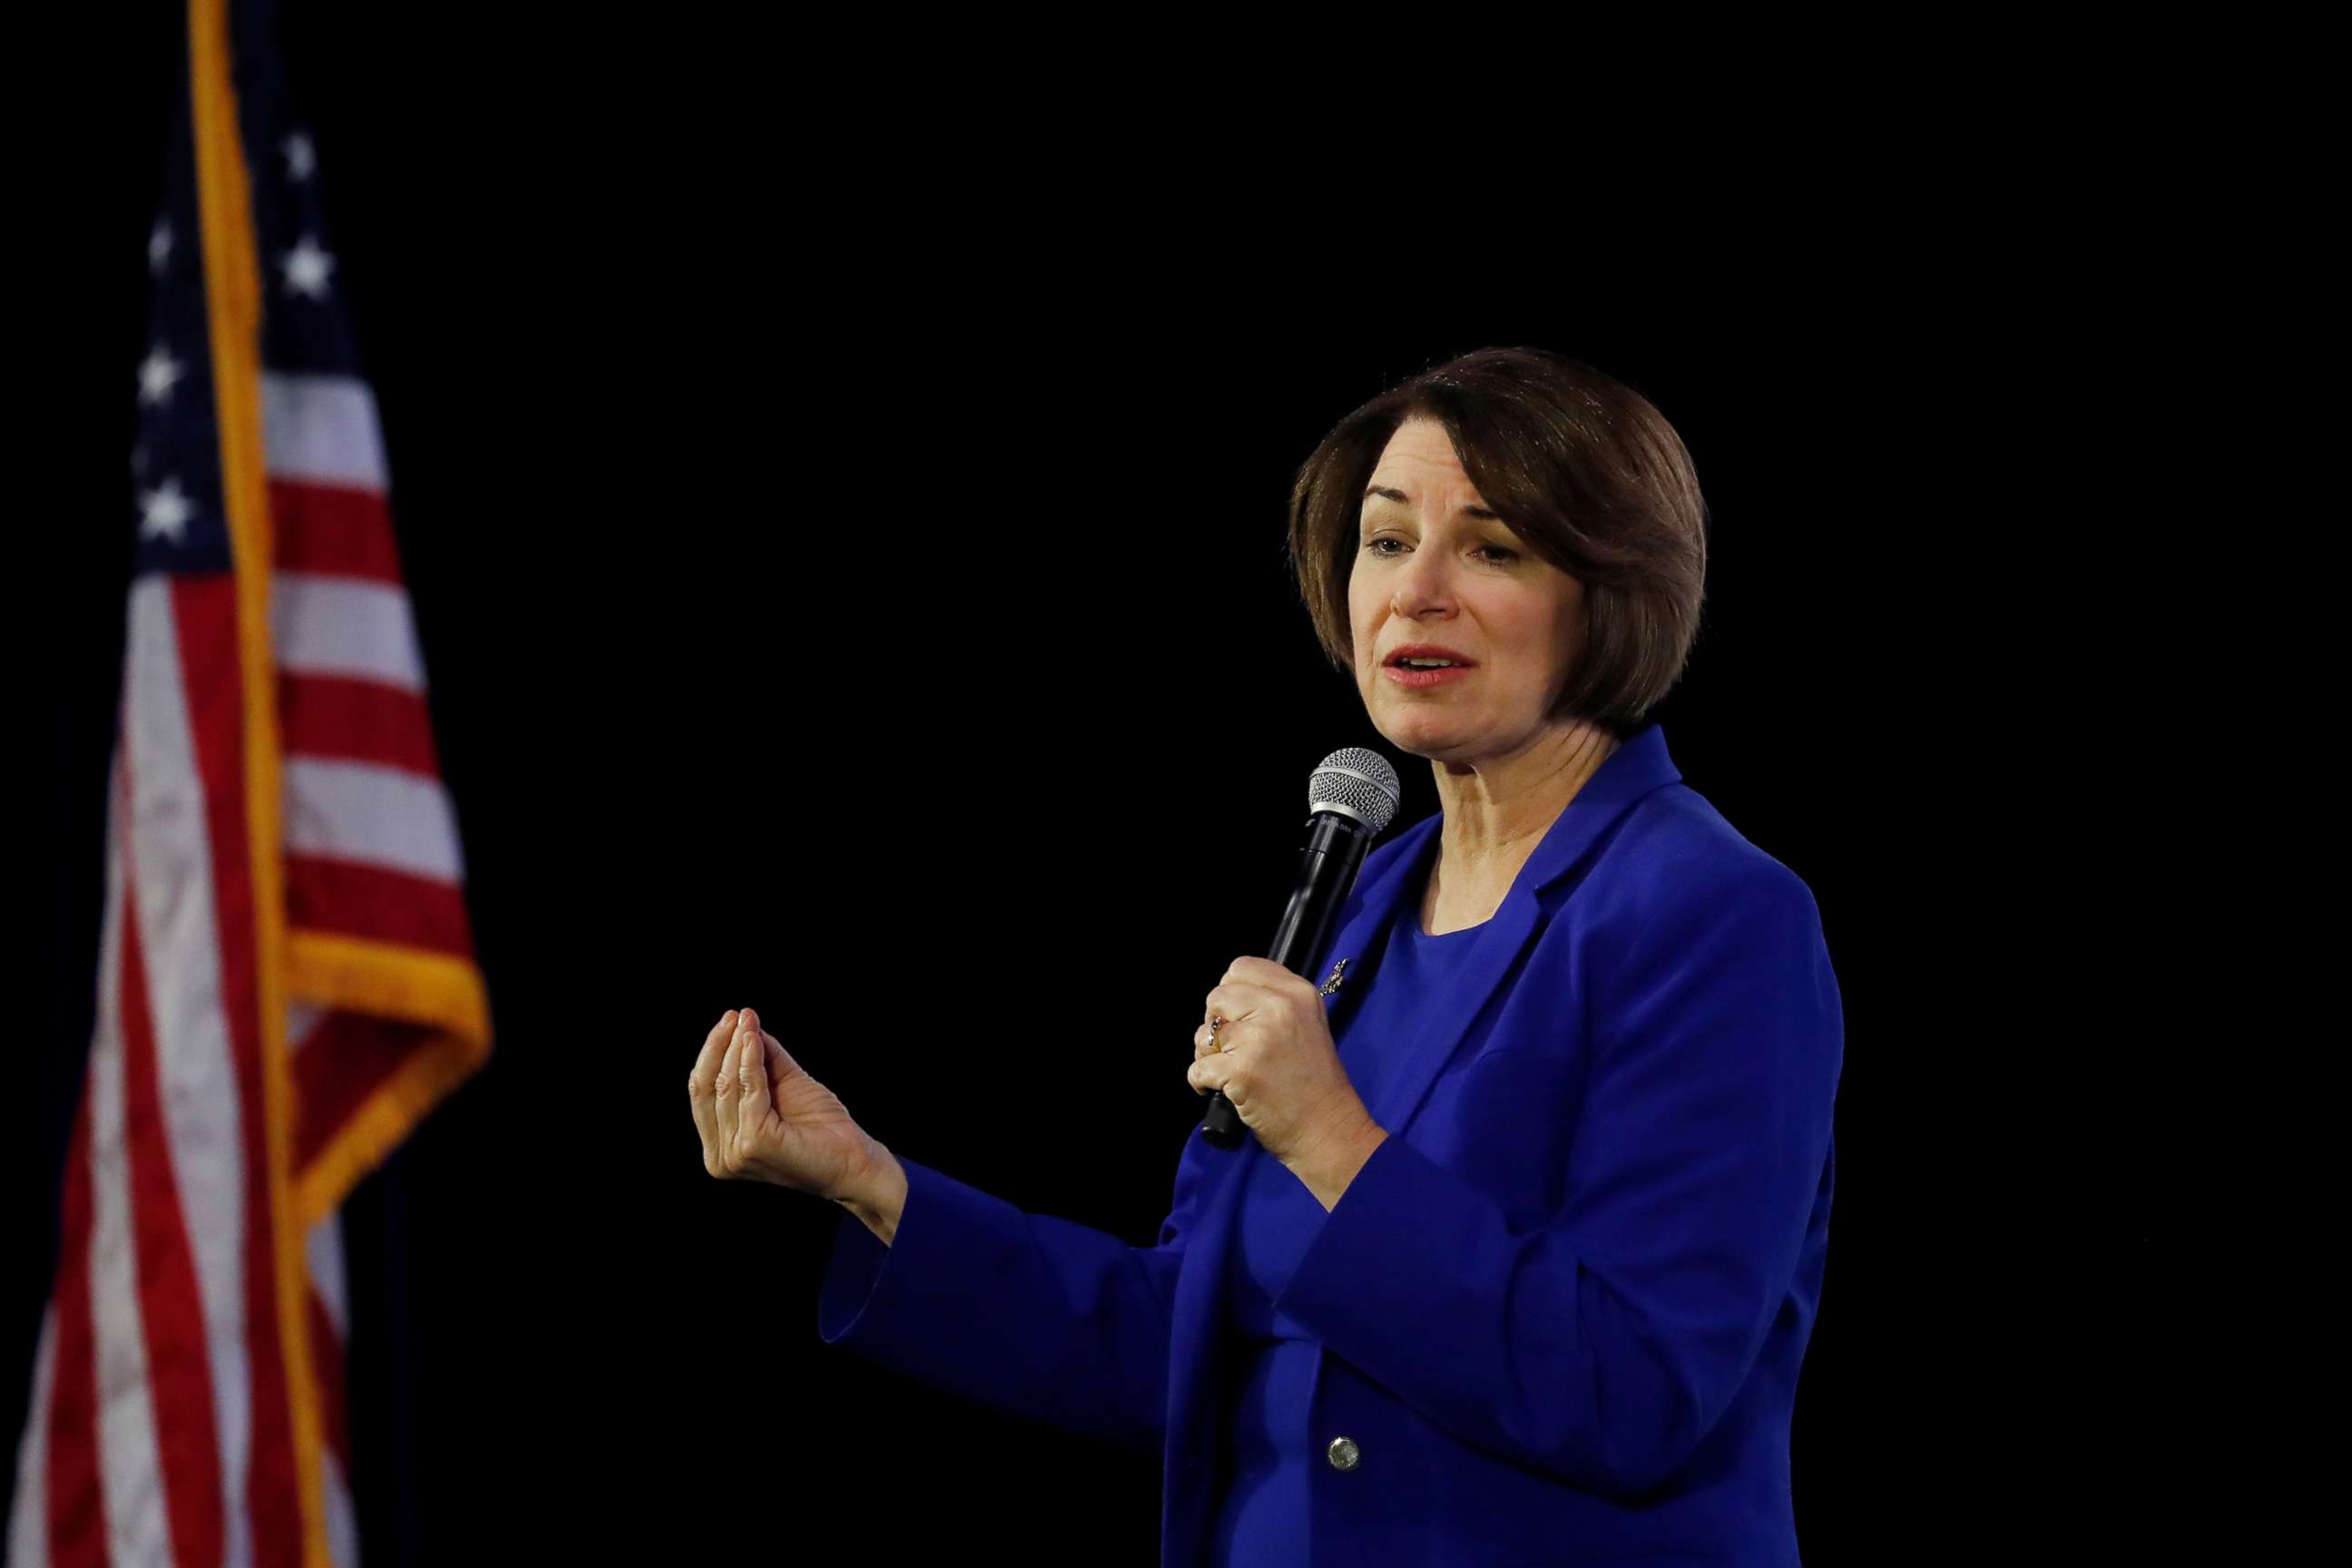 PHOTO: In this Feb. 16, 2020, file photo, Democratic presidential candidate Senator Amy Klobuchar speaks during the "Moving America Forward: A Presidential Candidate Forum on Infrastructure, Jobs and Building a Better America" event in Las Vegas.